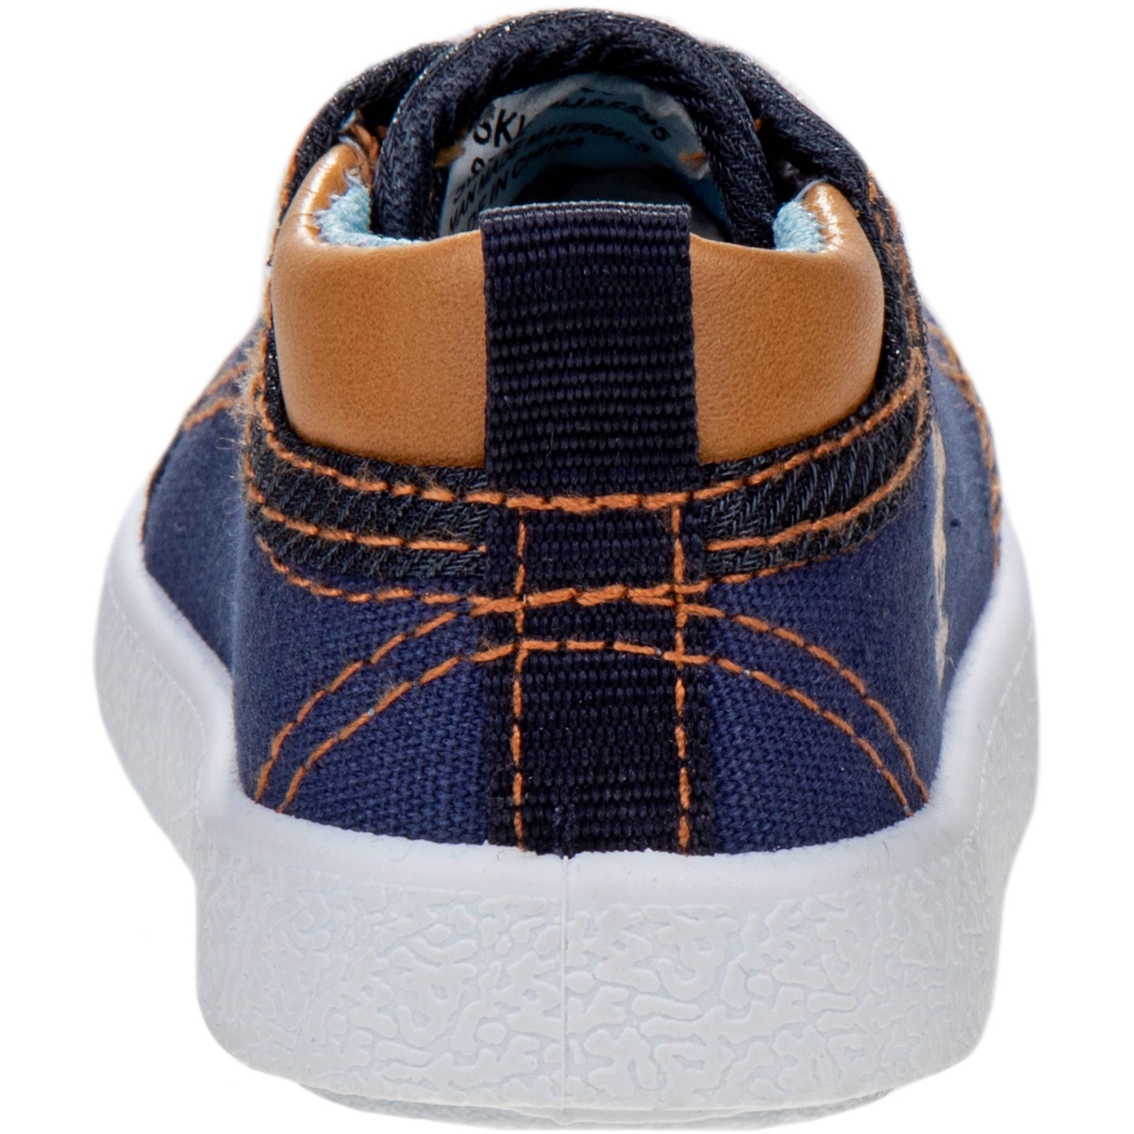 Beverly Hills Polo Club Infant Boys Canvas Sneakers - Image 4 of 6